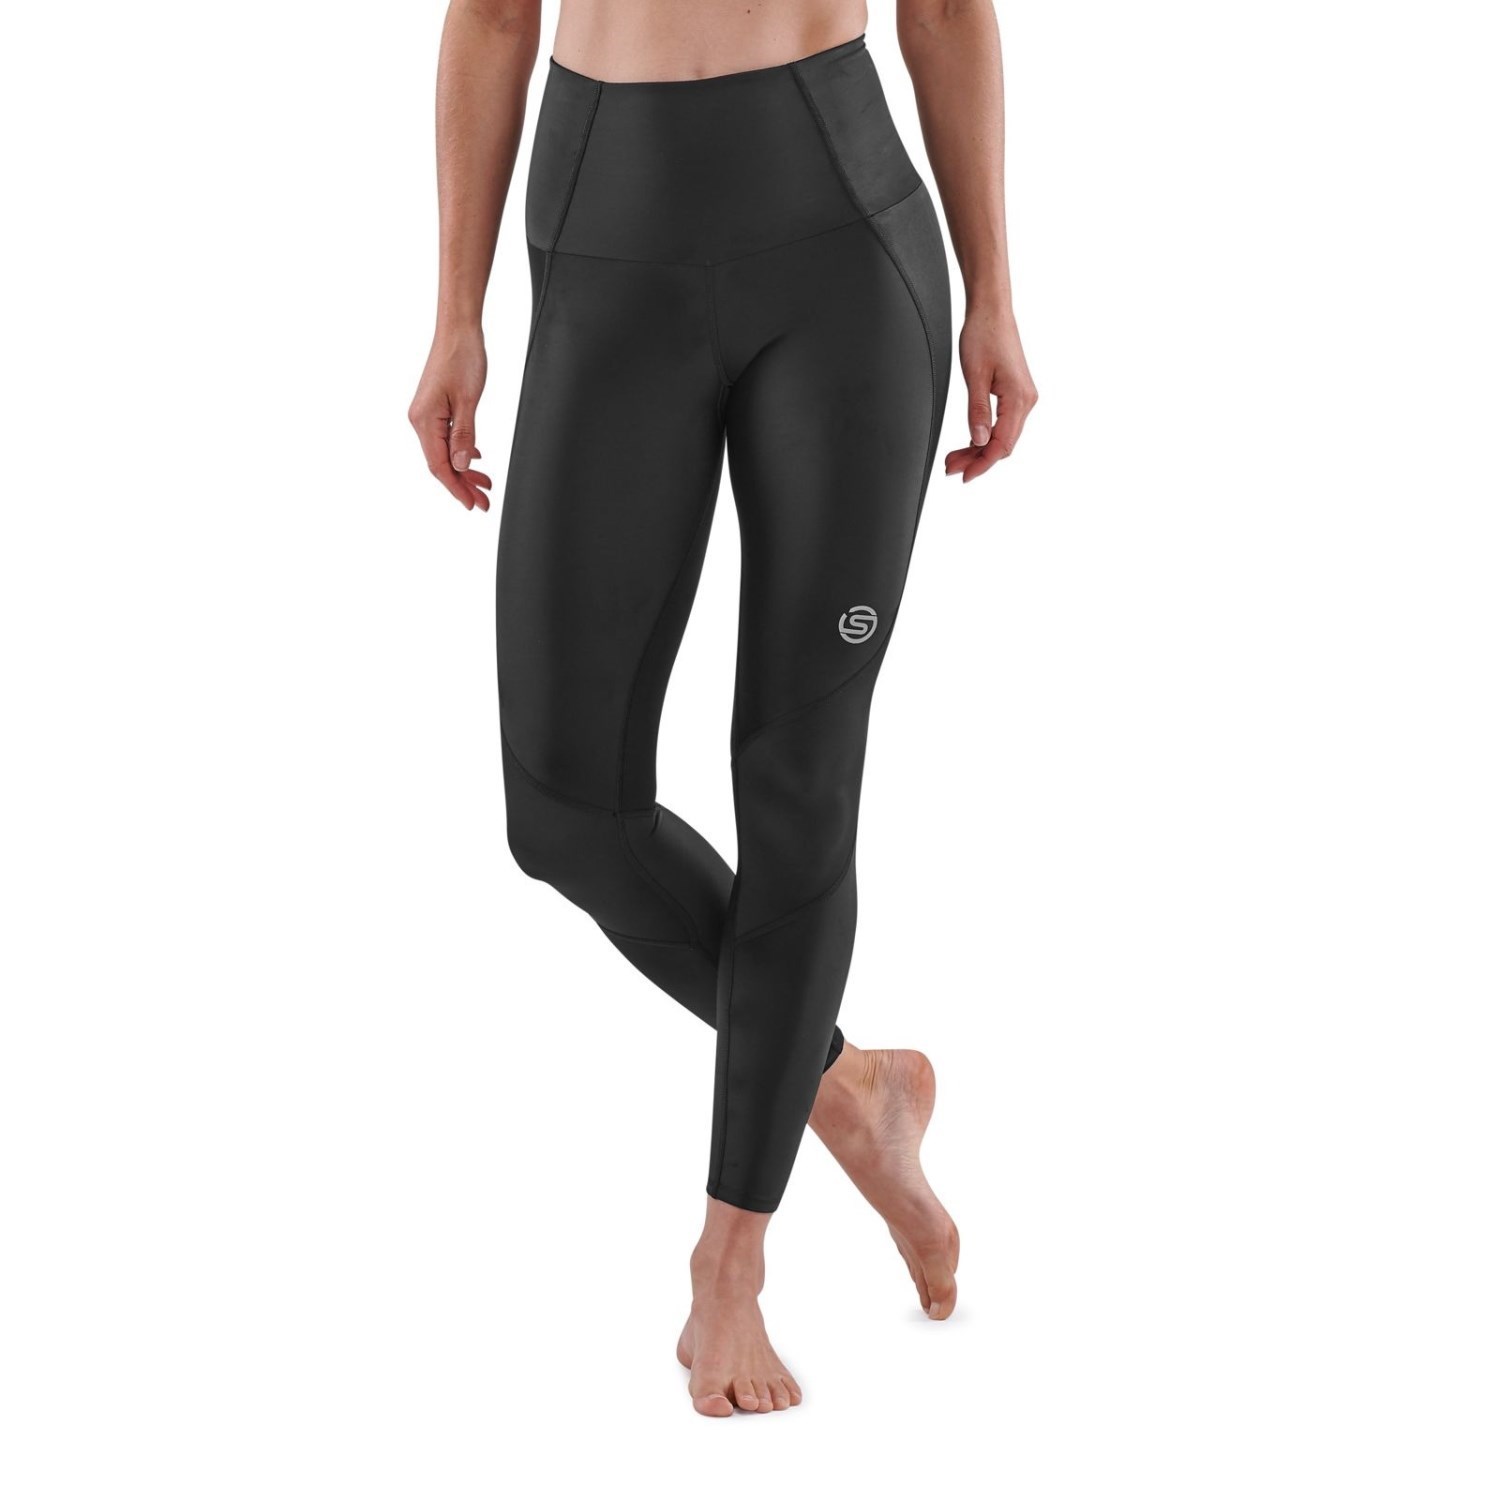 SKINS SERIES-3 WOMEN'S THERMAL LONG TIGHTS BLACK - SKINS Compression USA